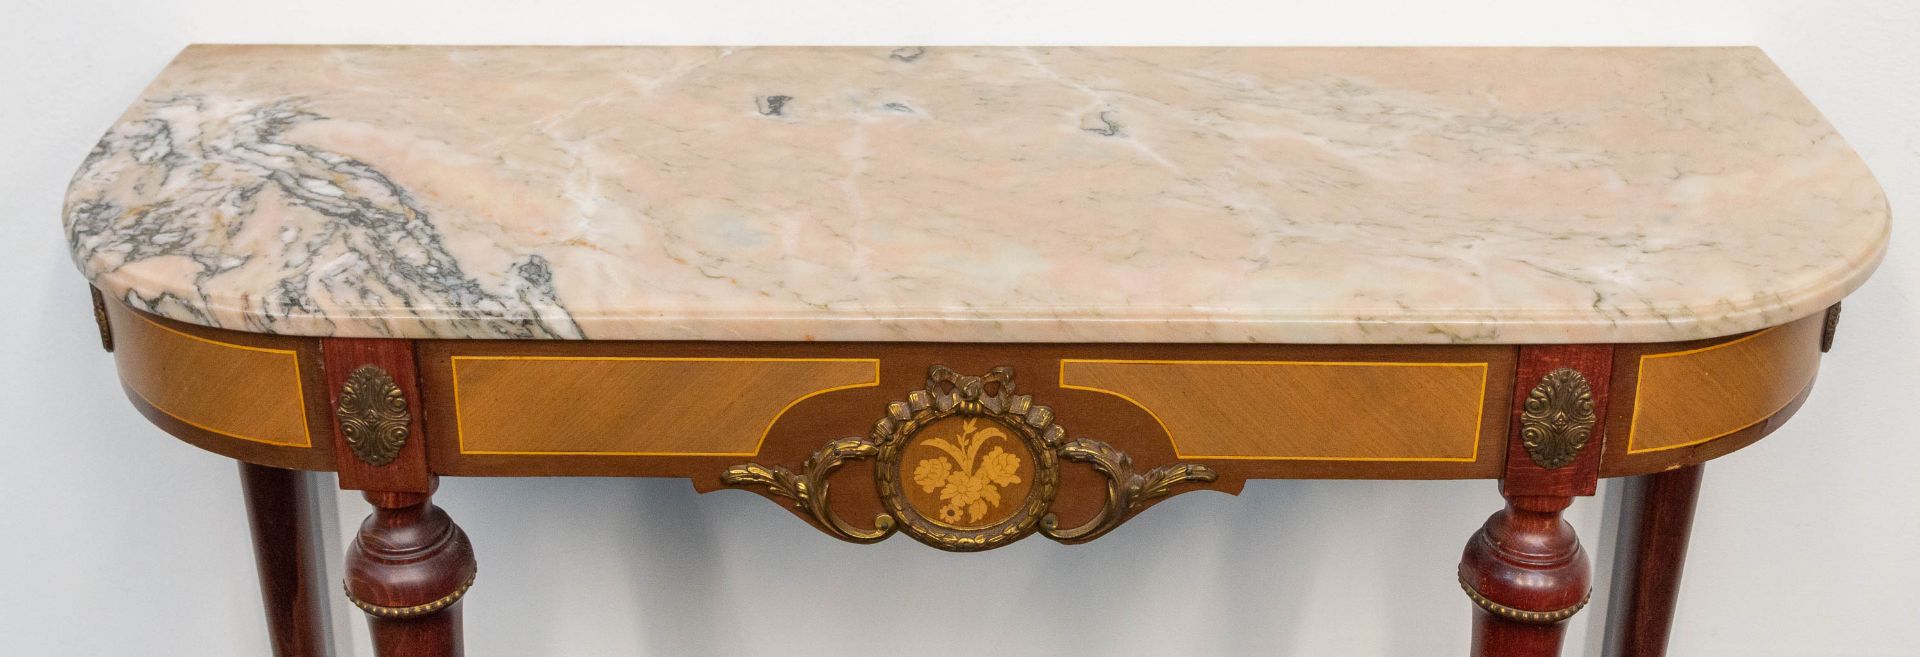 A console table with mirror, inlaid with marquetry, mounted with bronze and with a marble top. - Image 11 of 11